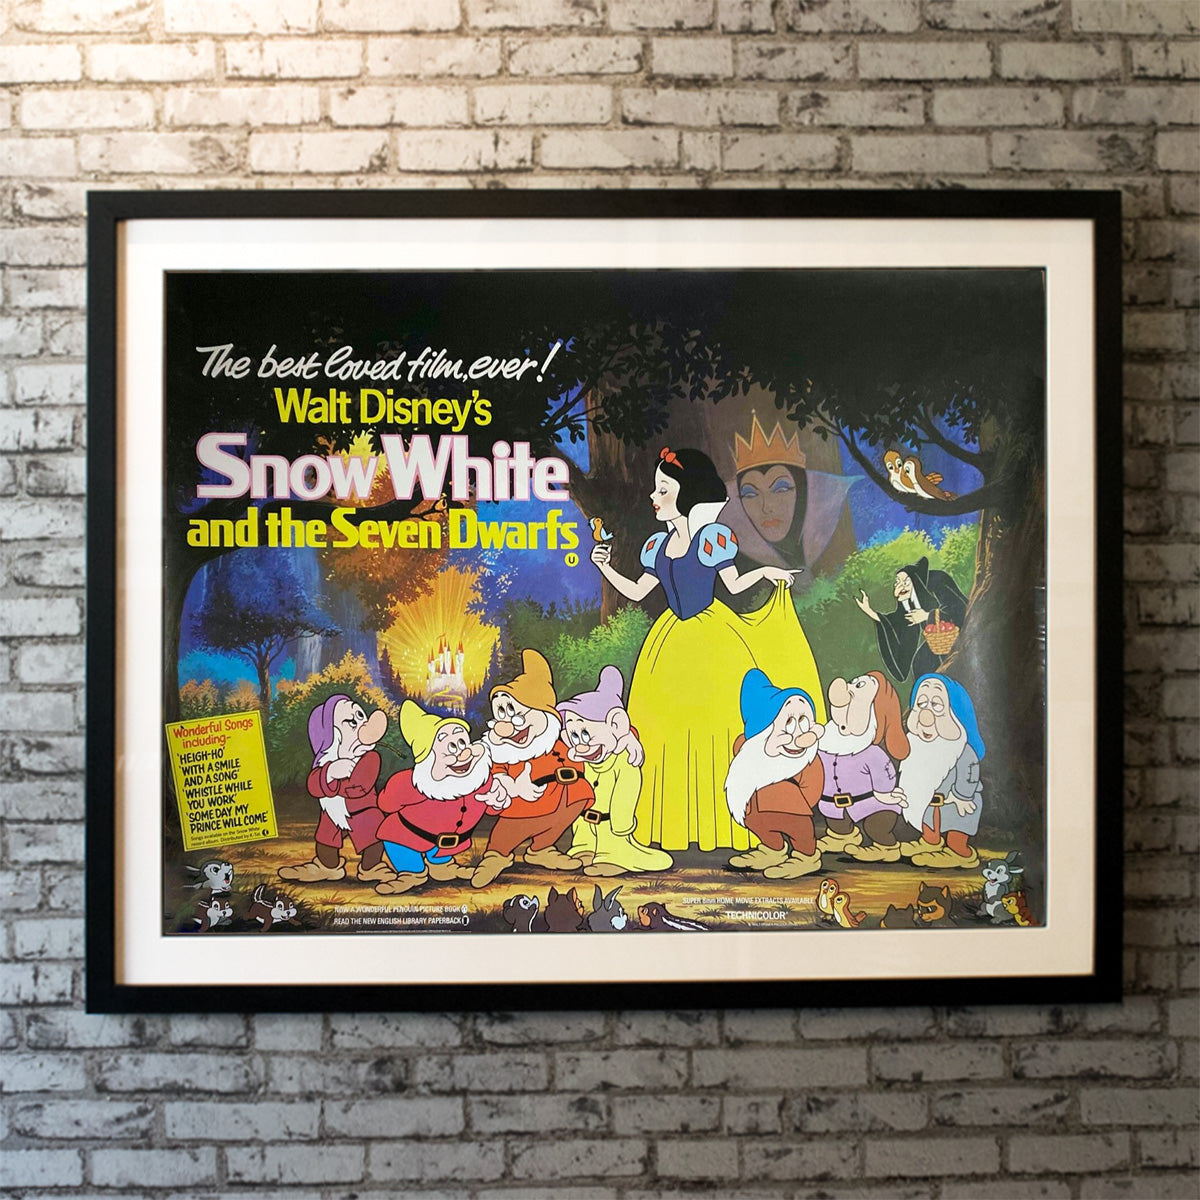 Snow White and The Seven Dwarfs (R1980)